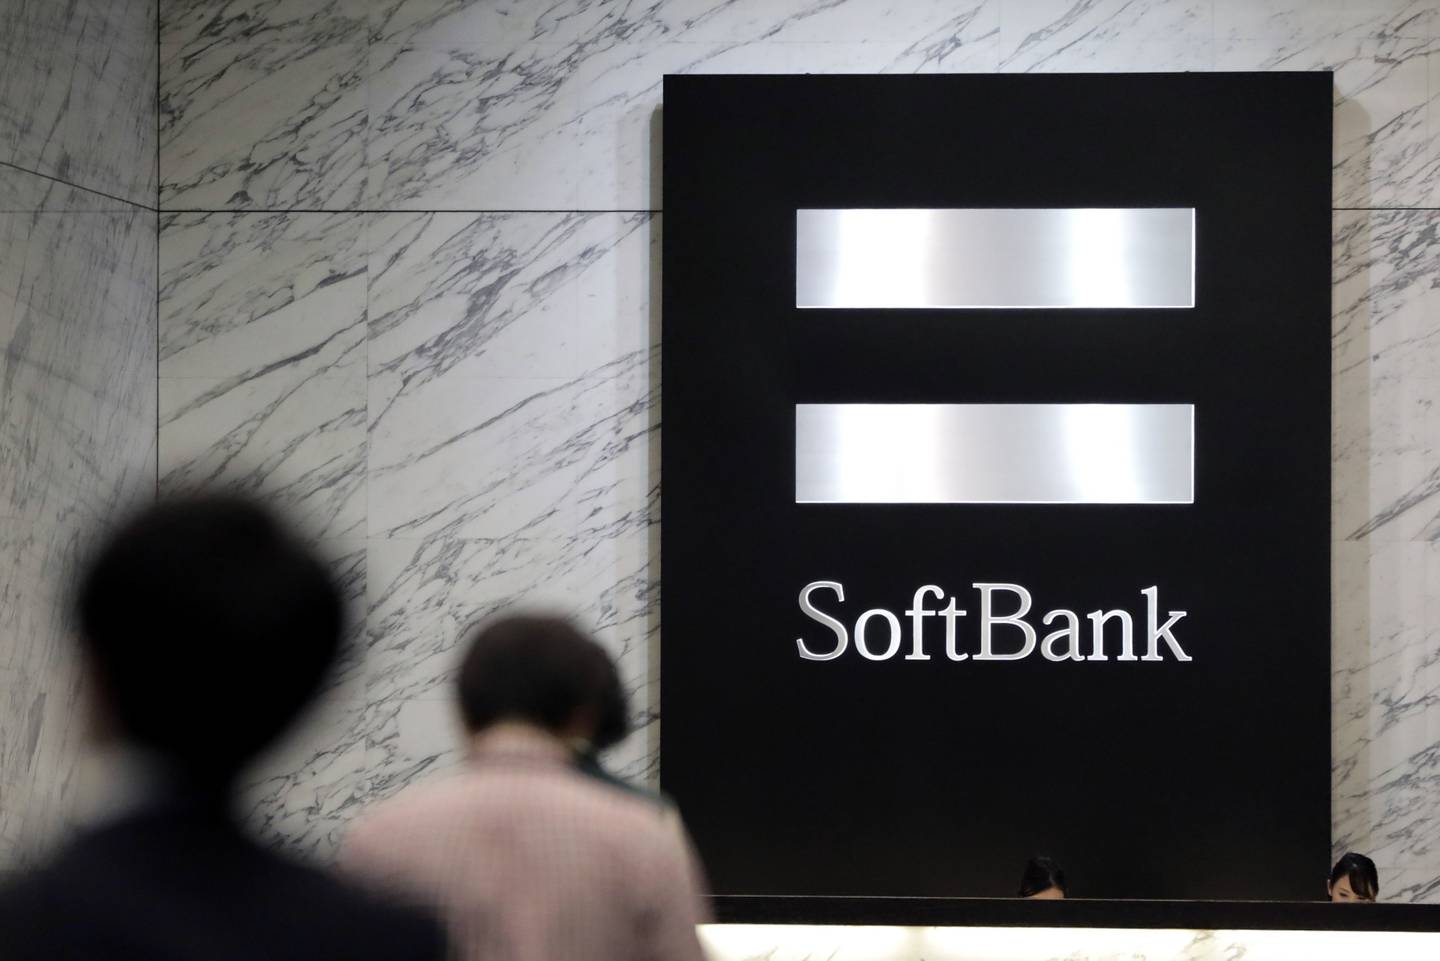 Since the LatAm Fund’s founding in 2019, SoftBank has managed about $8 billion in the two funds, of which $7.68 billion has already been allocated.